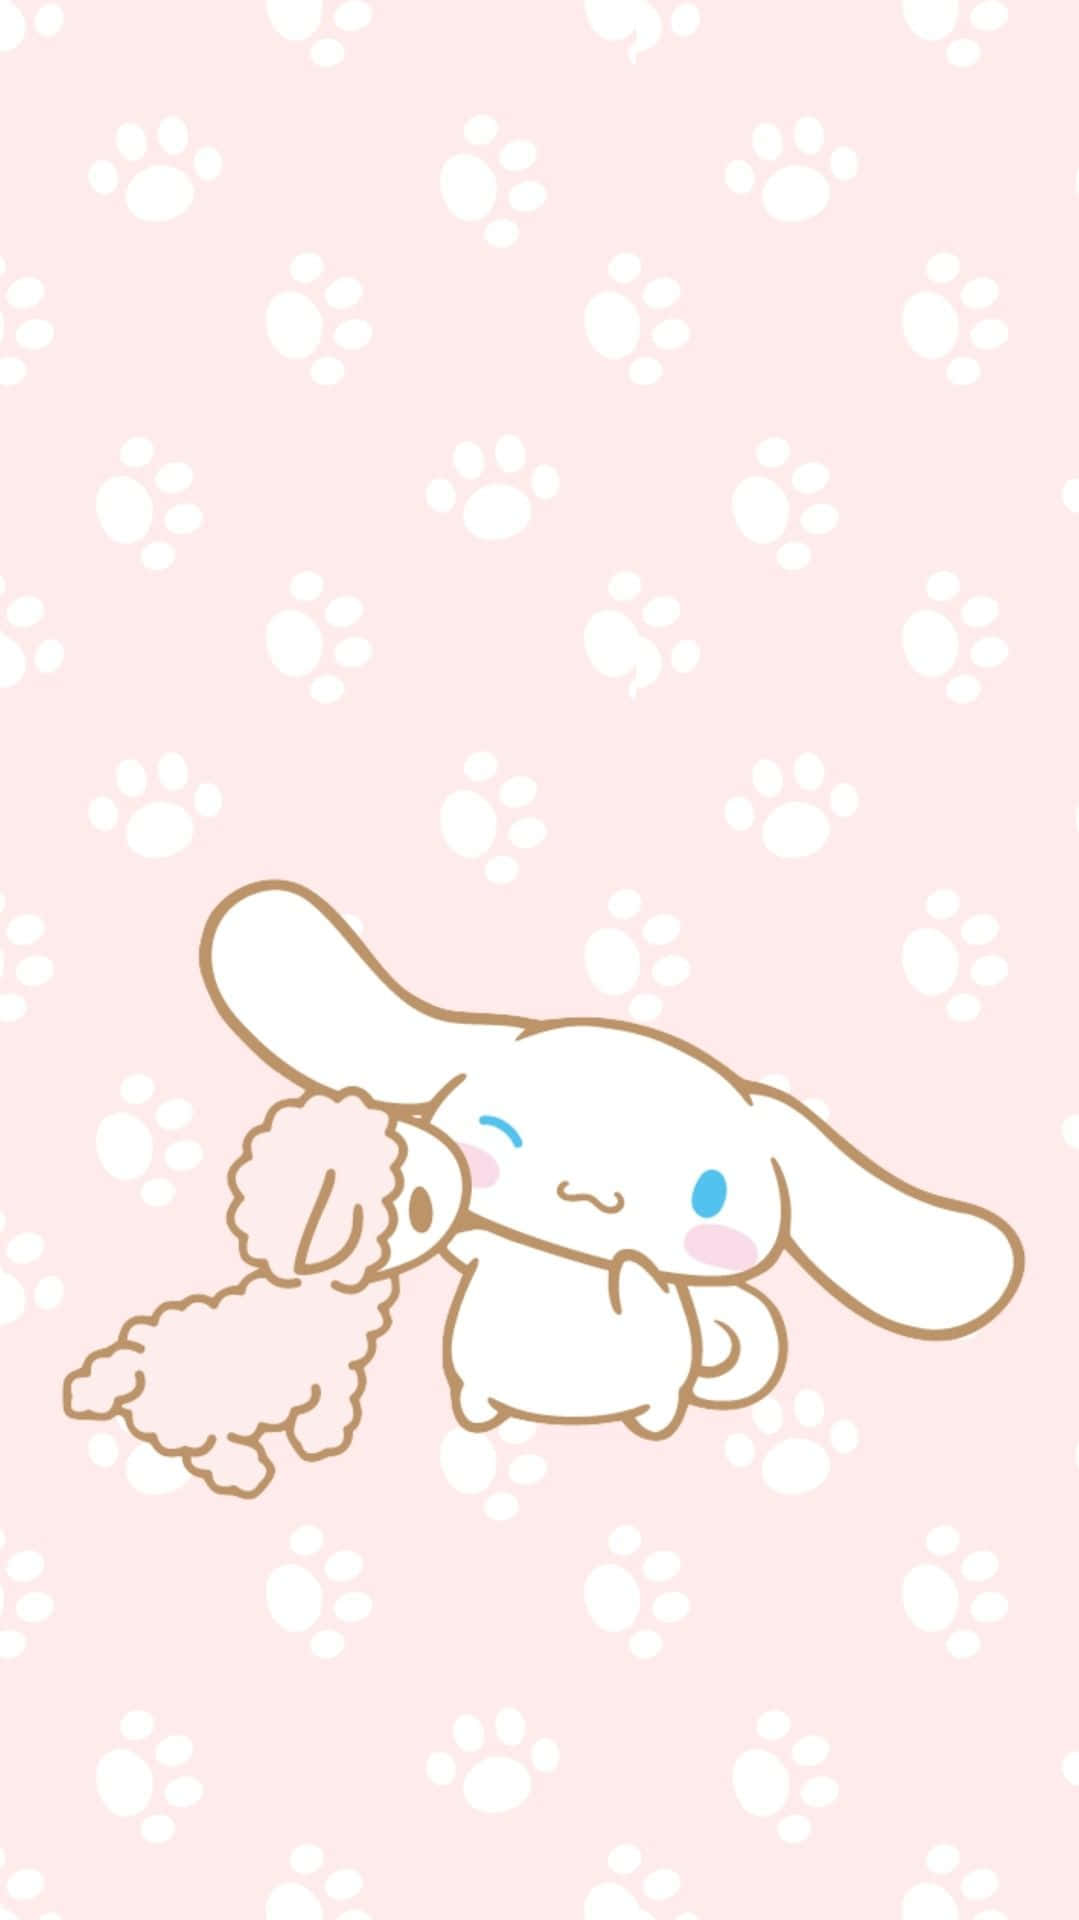 A White Bunny With Paw Prints On A Pink Background Wallpaper